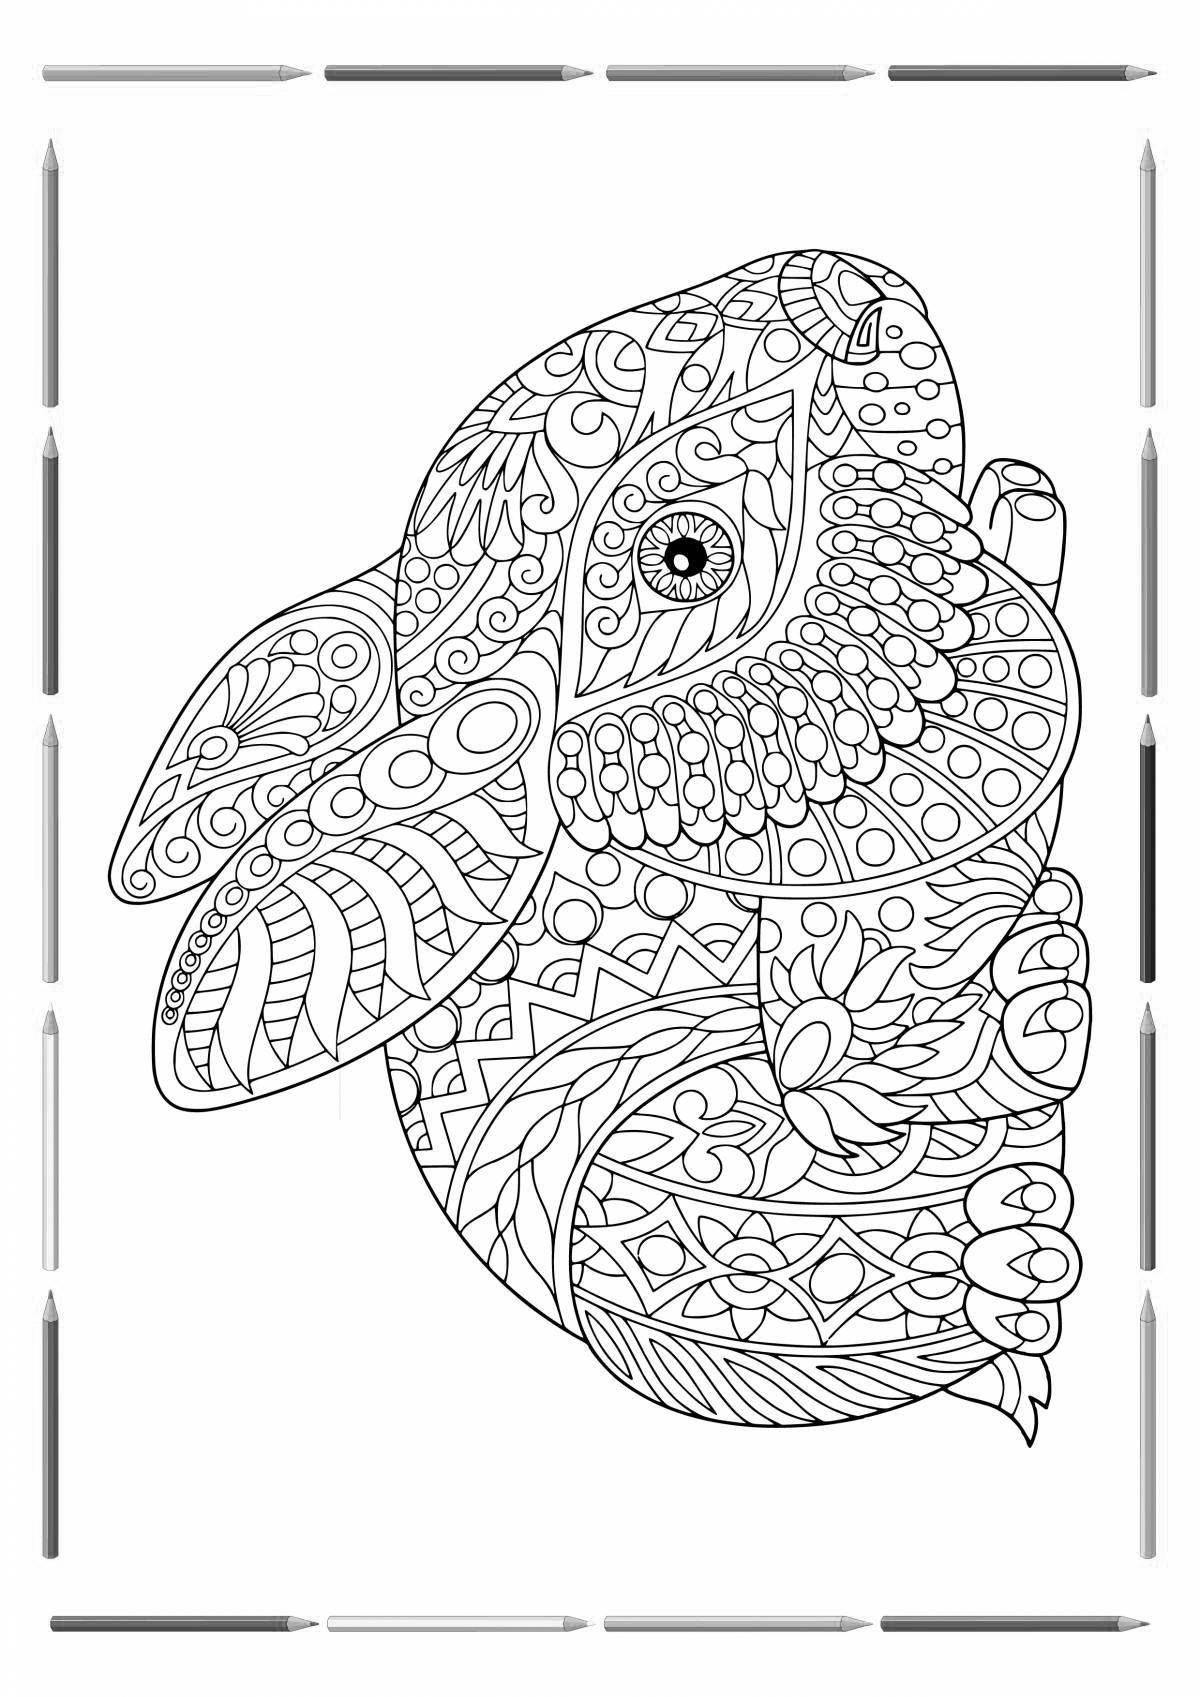 Incredible anti-stress coloring book for 10 year olds